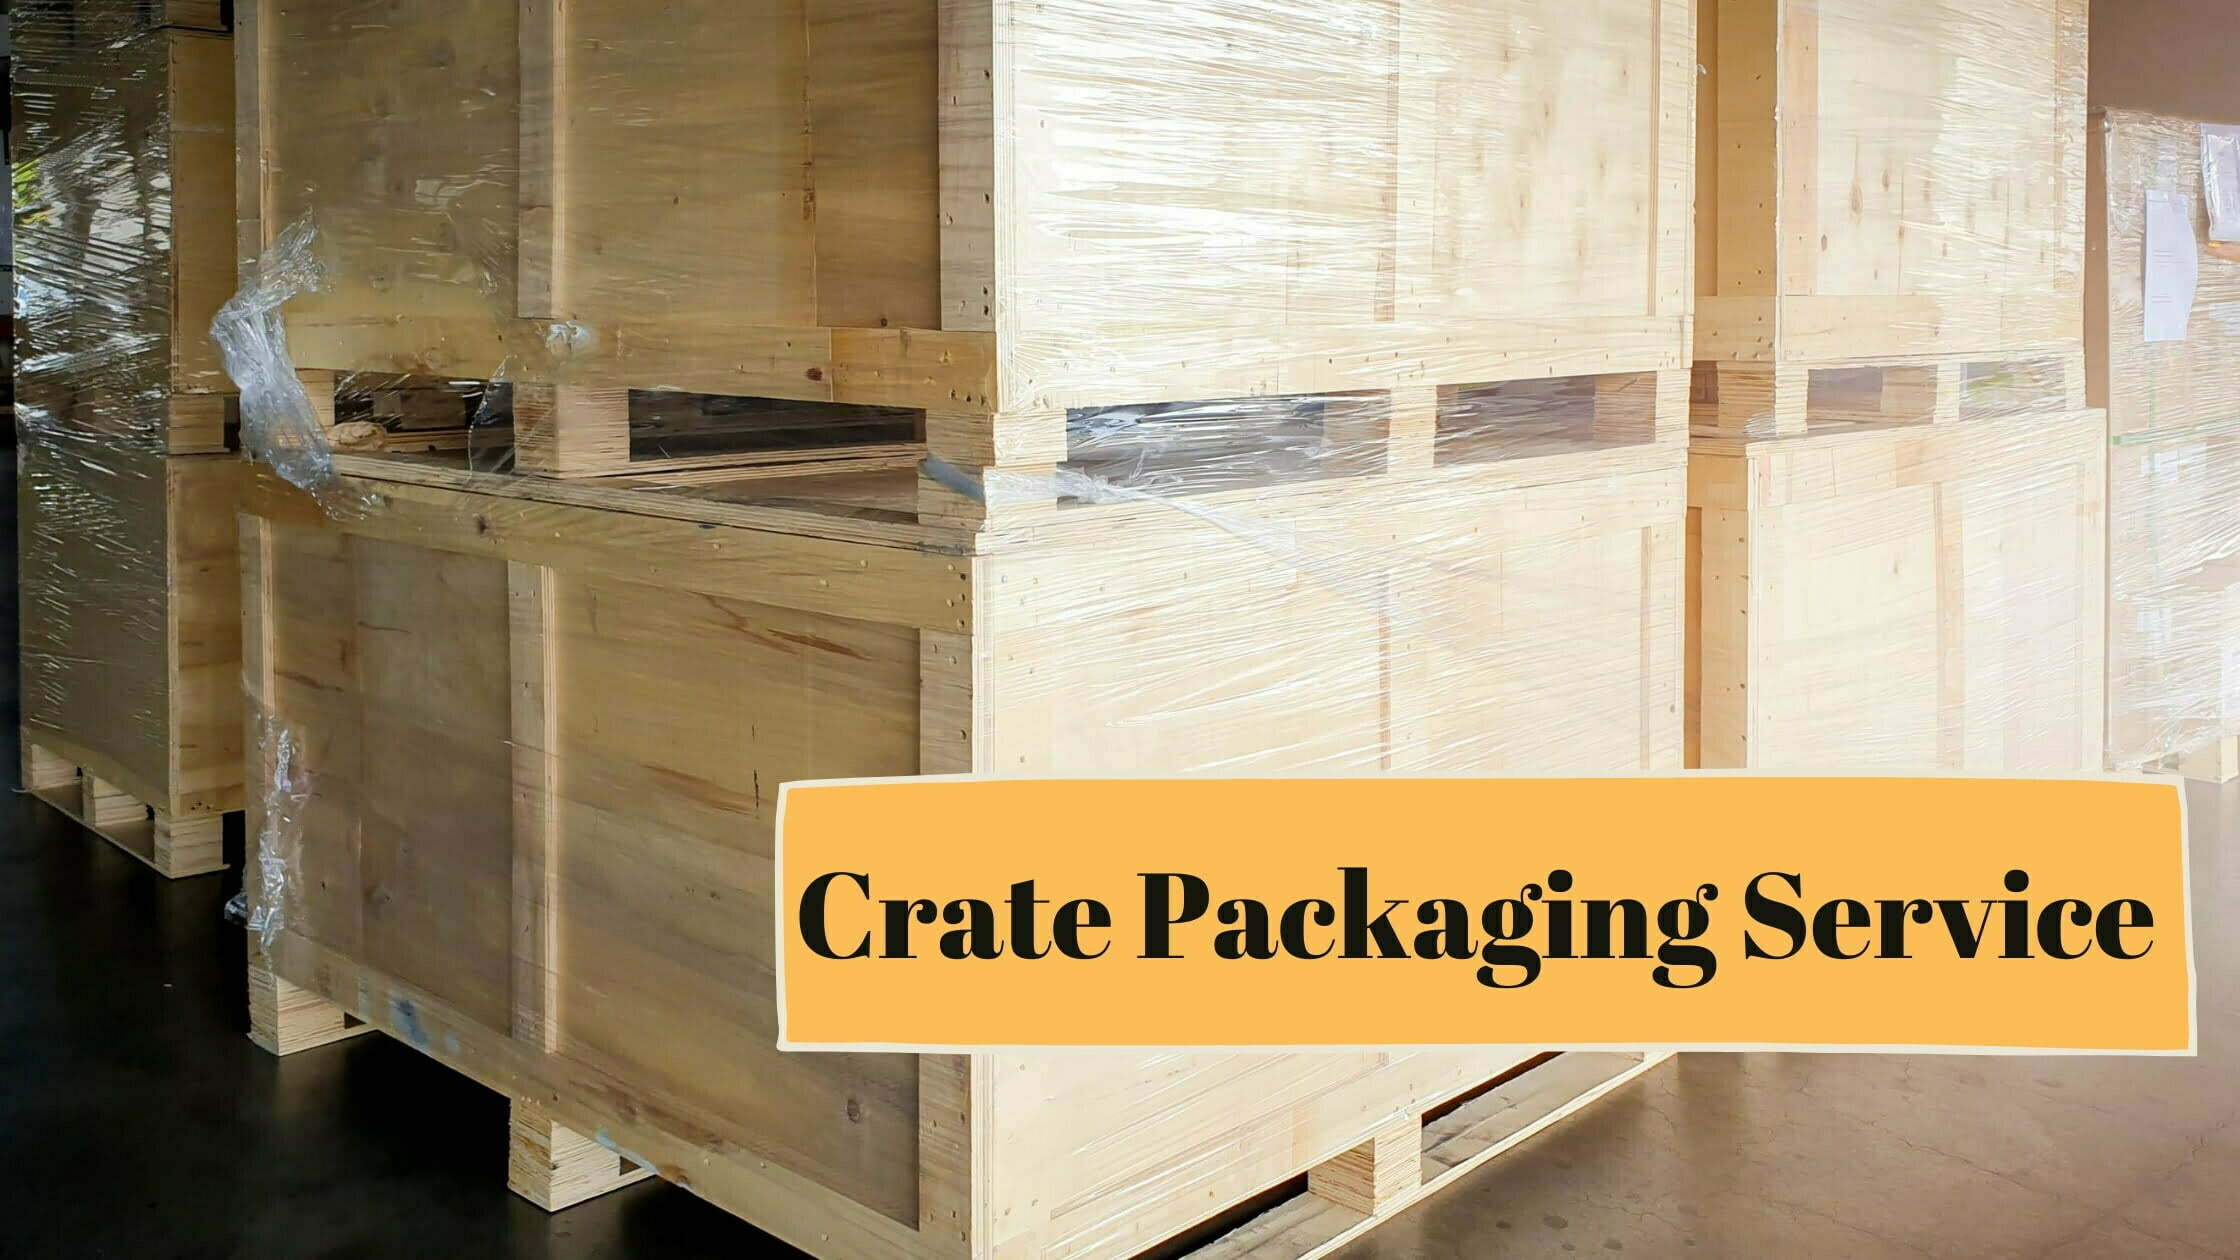 Crate Packaging Service